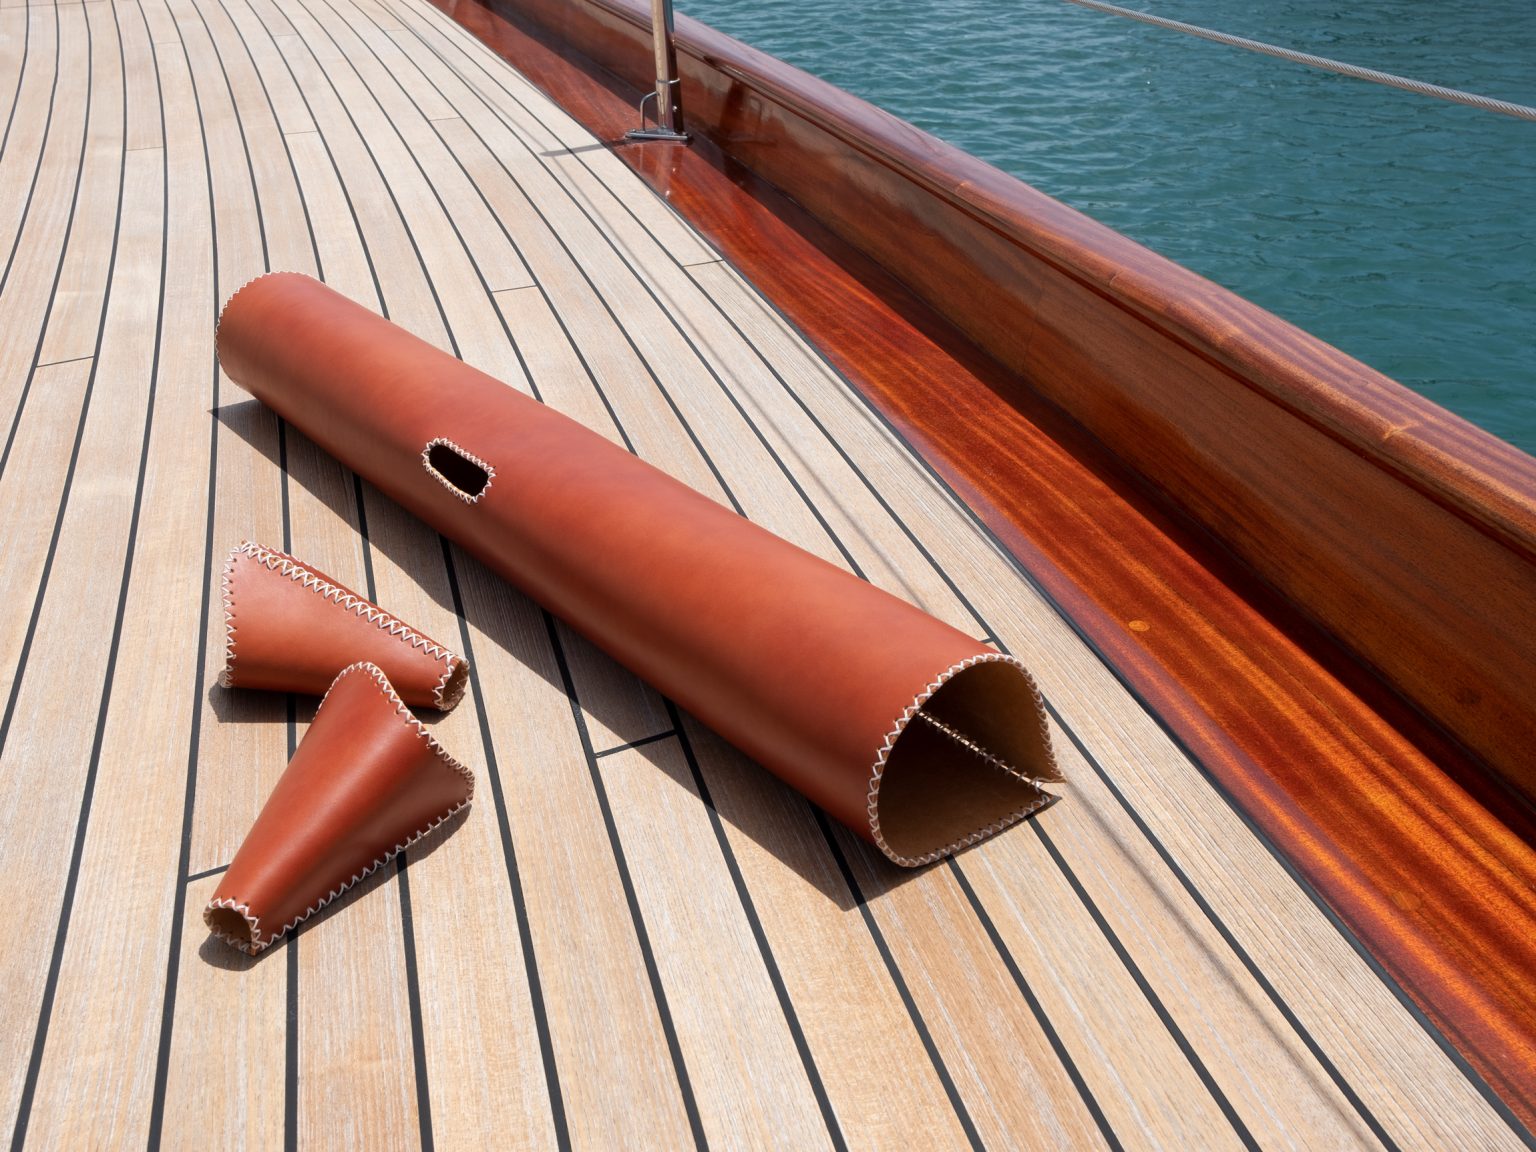 Leather Covers on SEA LION